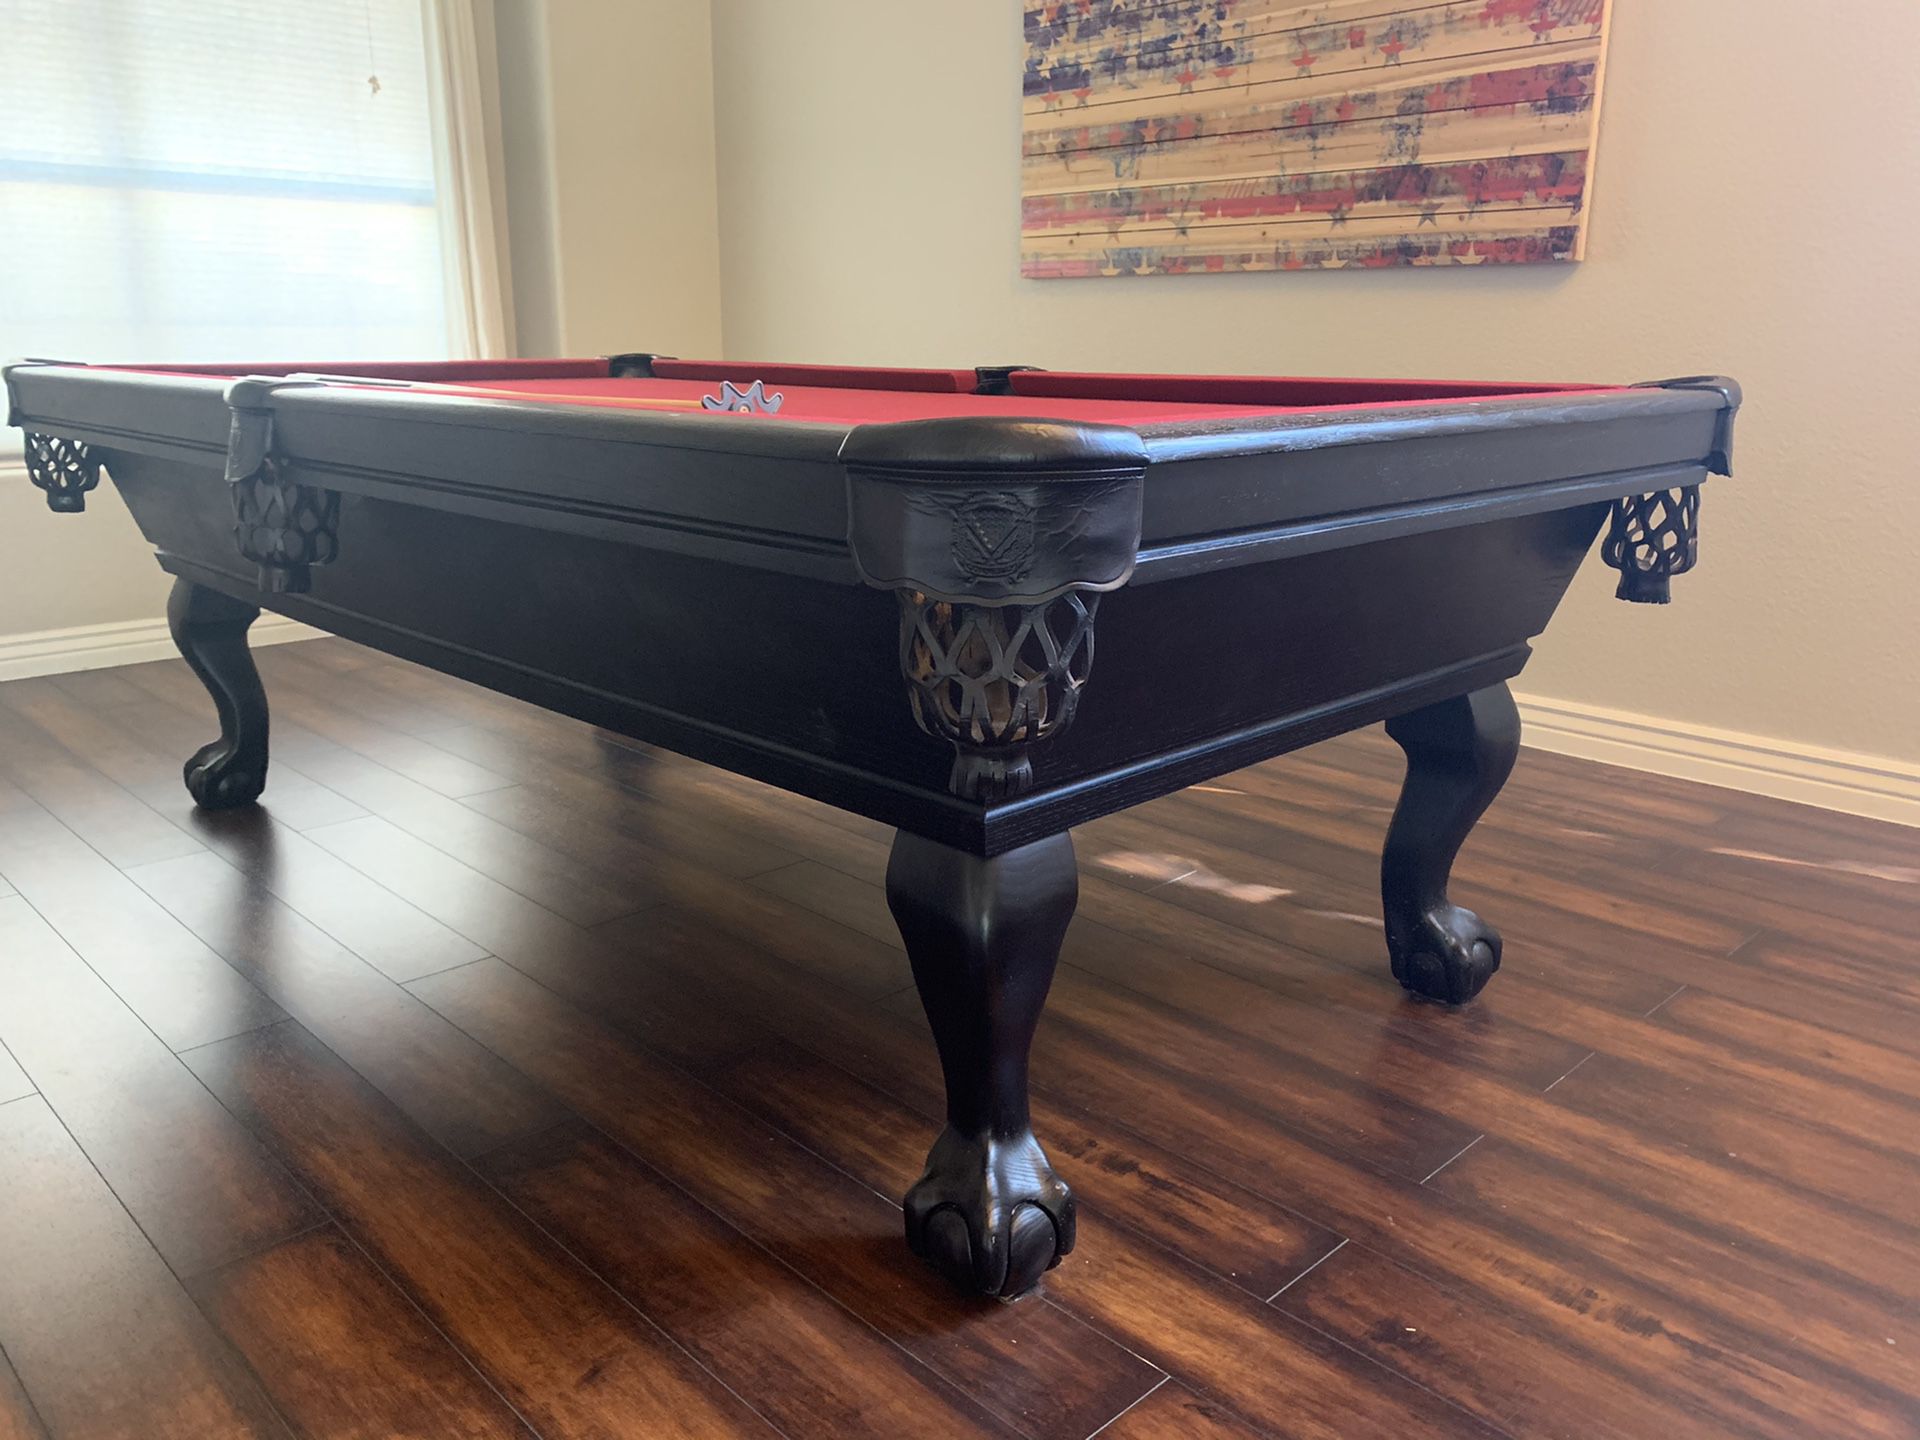 7ft black/ OR white Connelly pool table! Price includes delivery/installation! New cloth! Your choice of color!